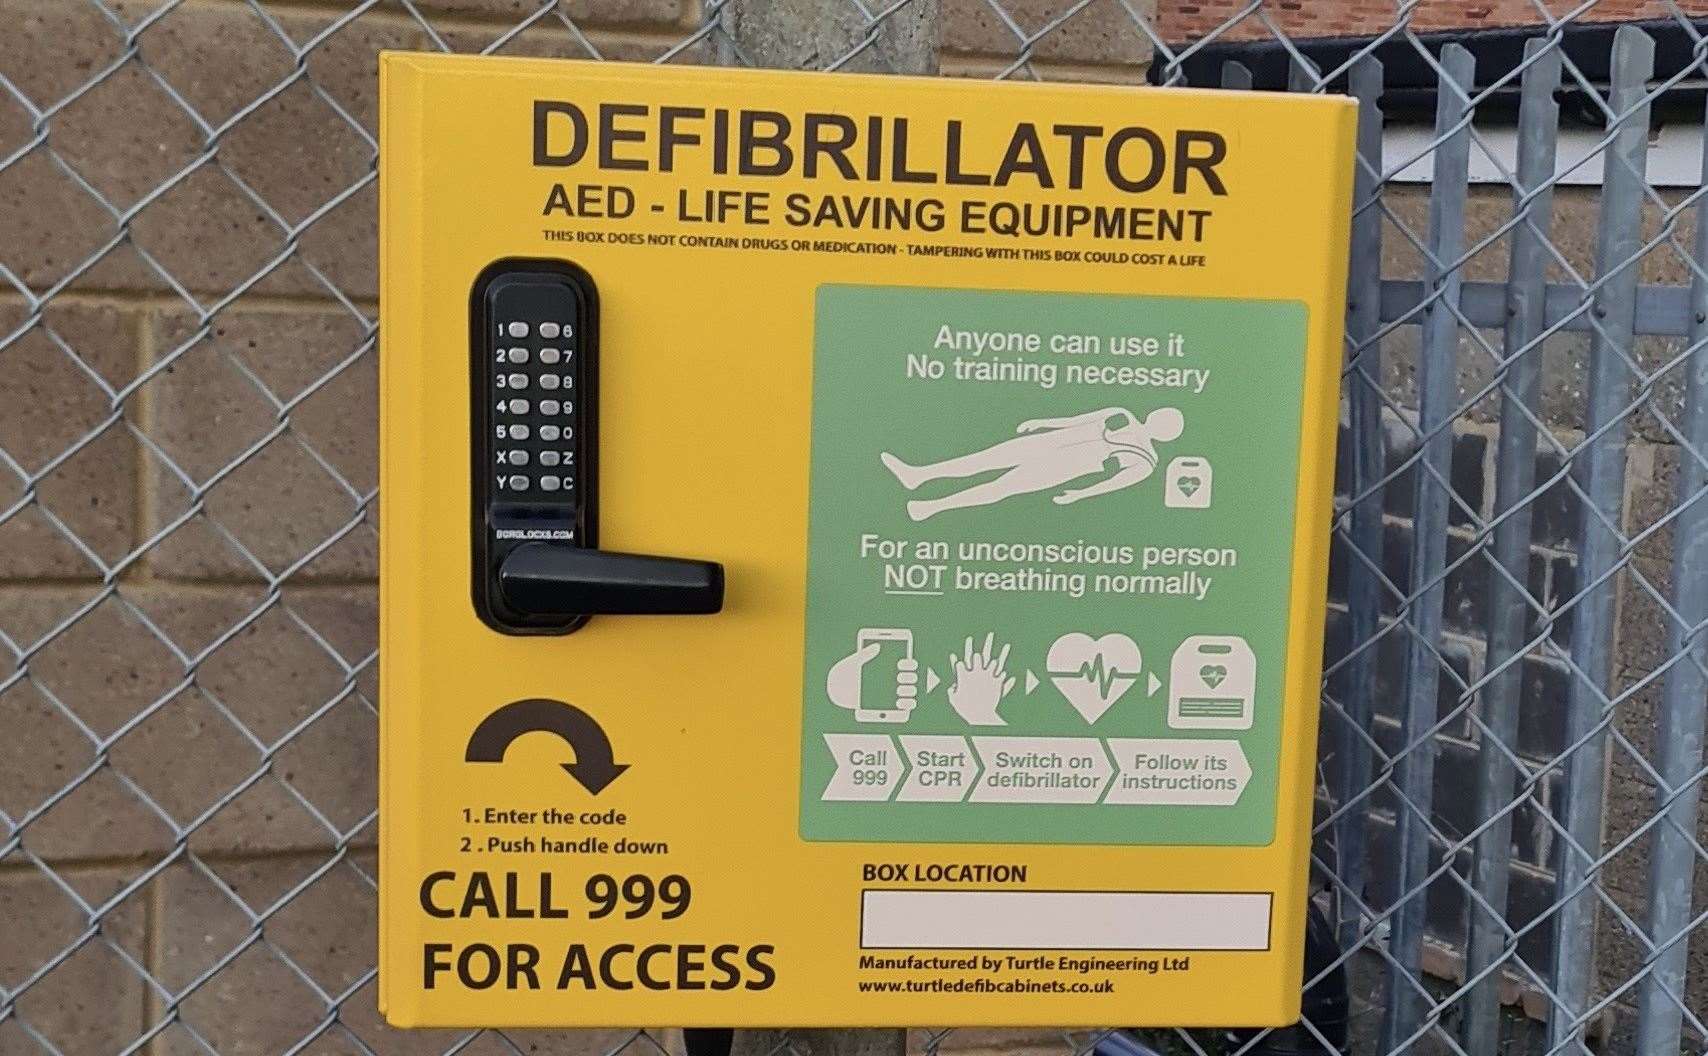 Defibrillators like this one can be used to save a life